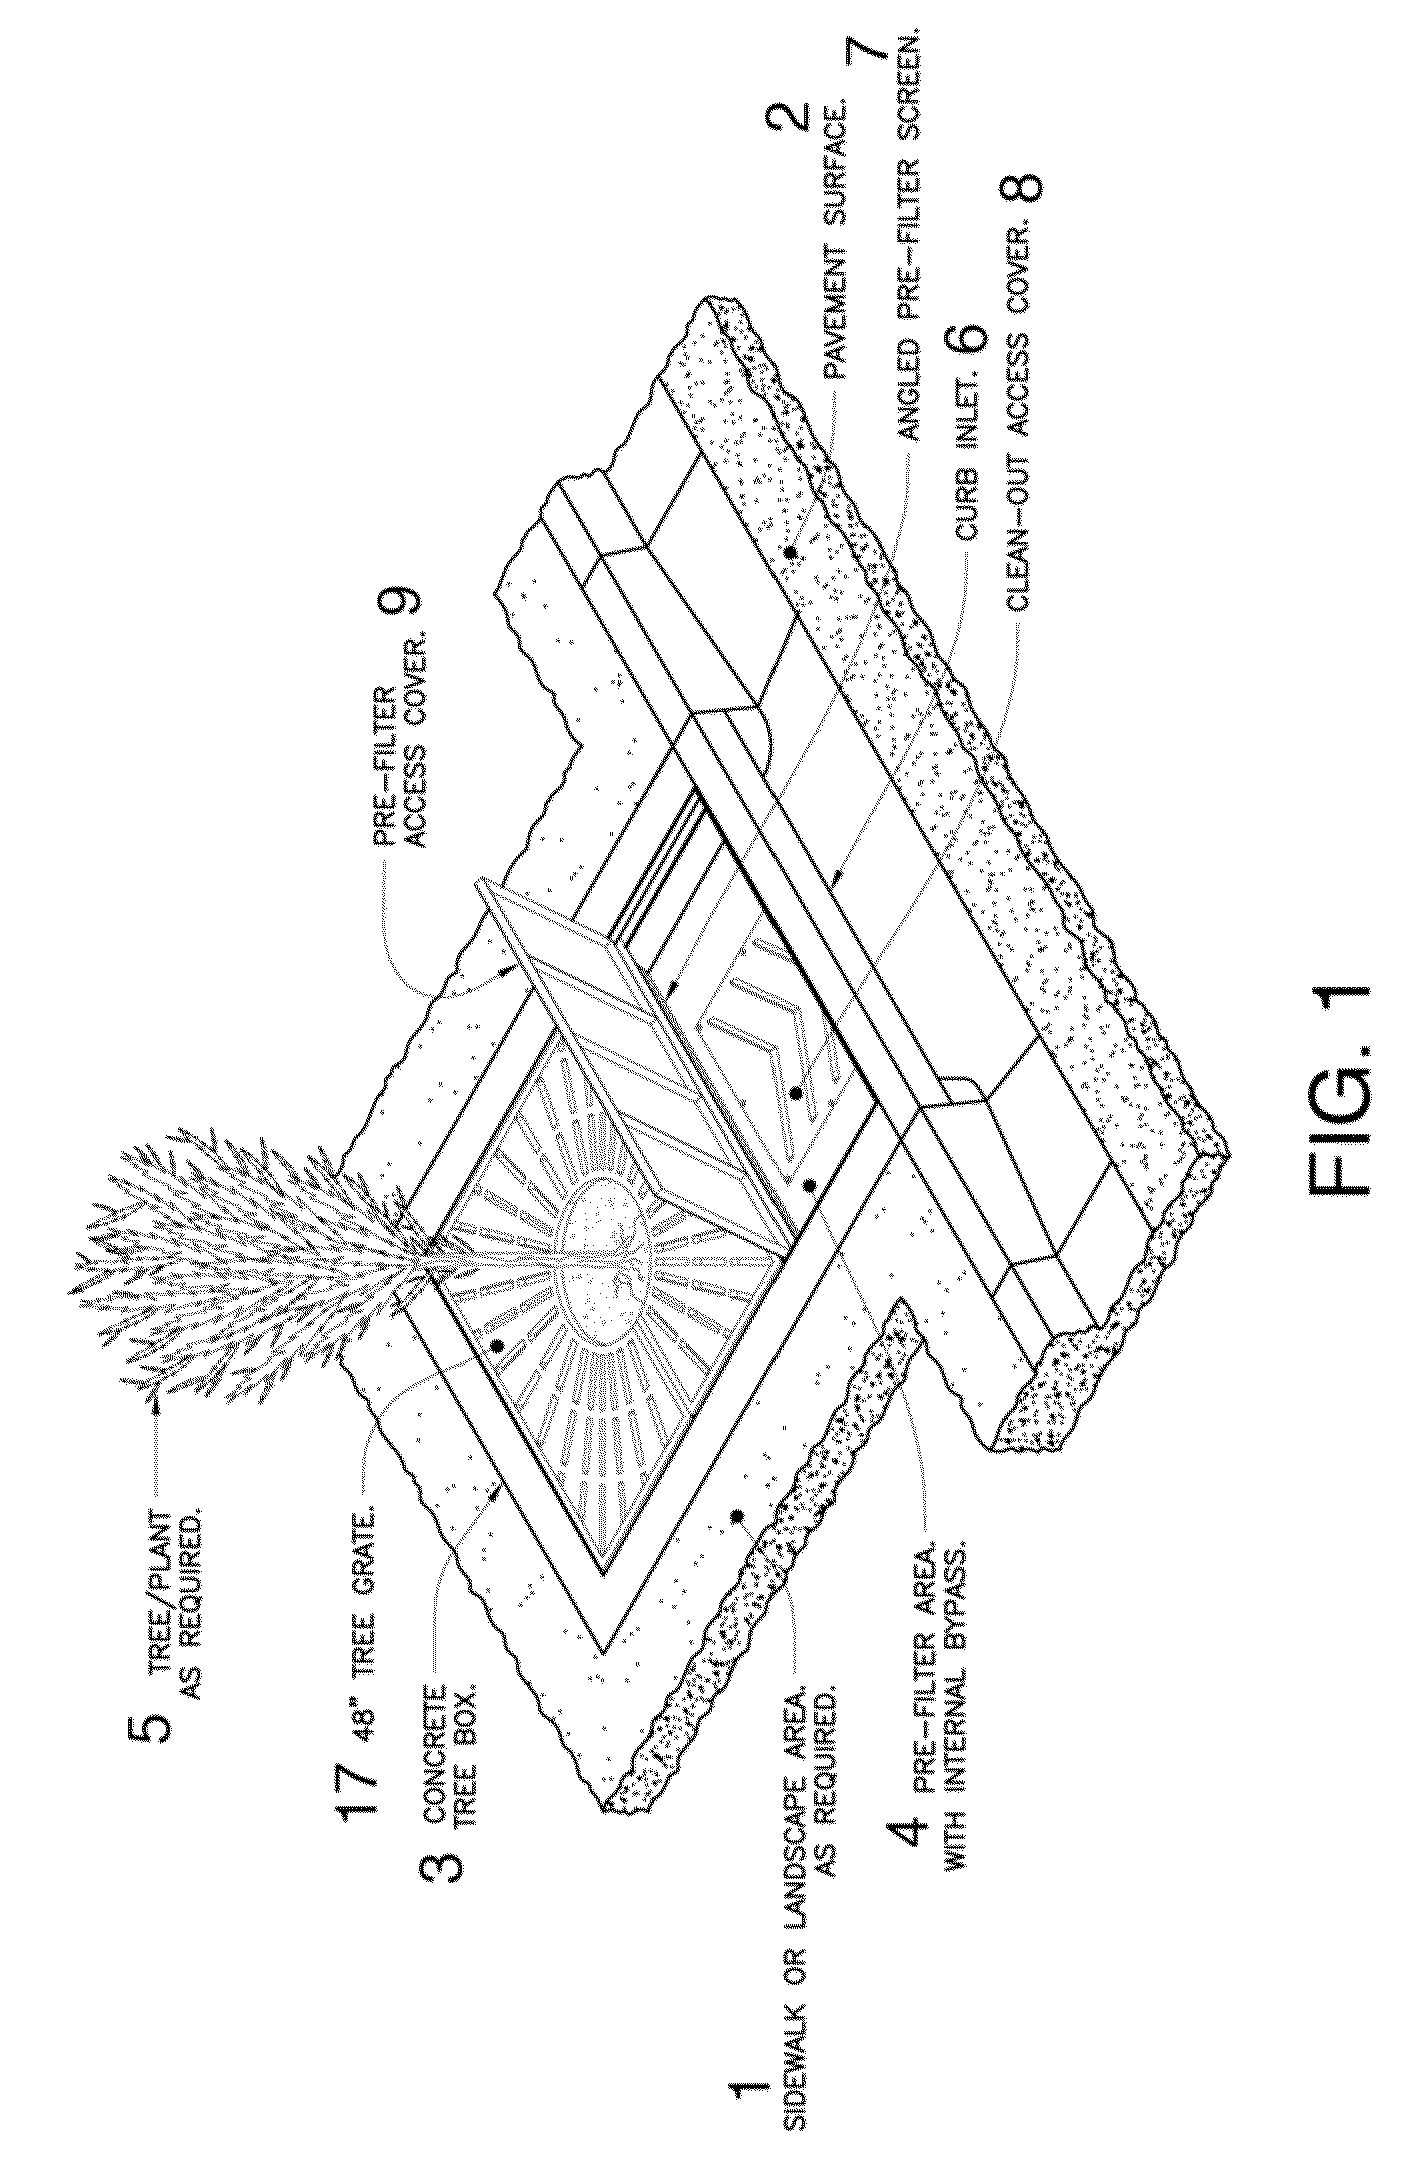 Bioretention system with high internal high flow bypass